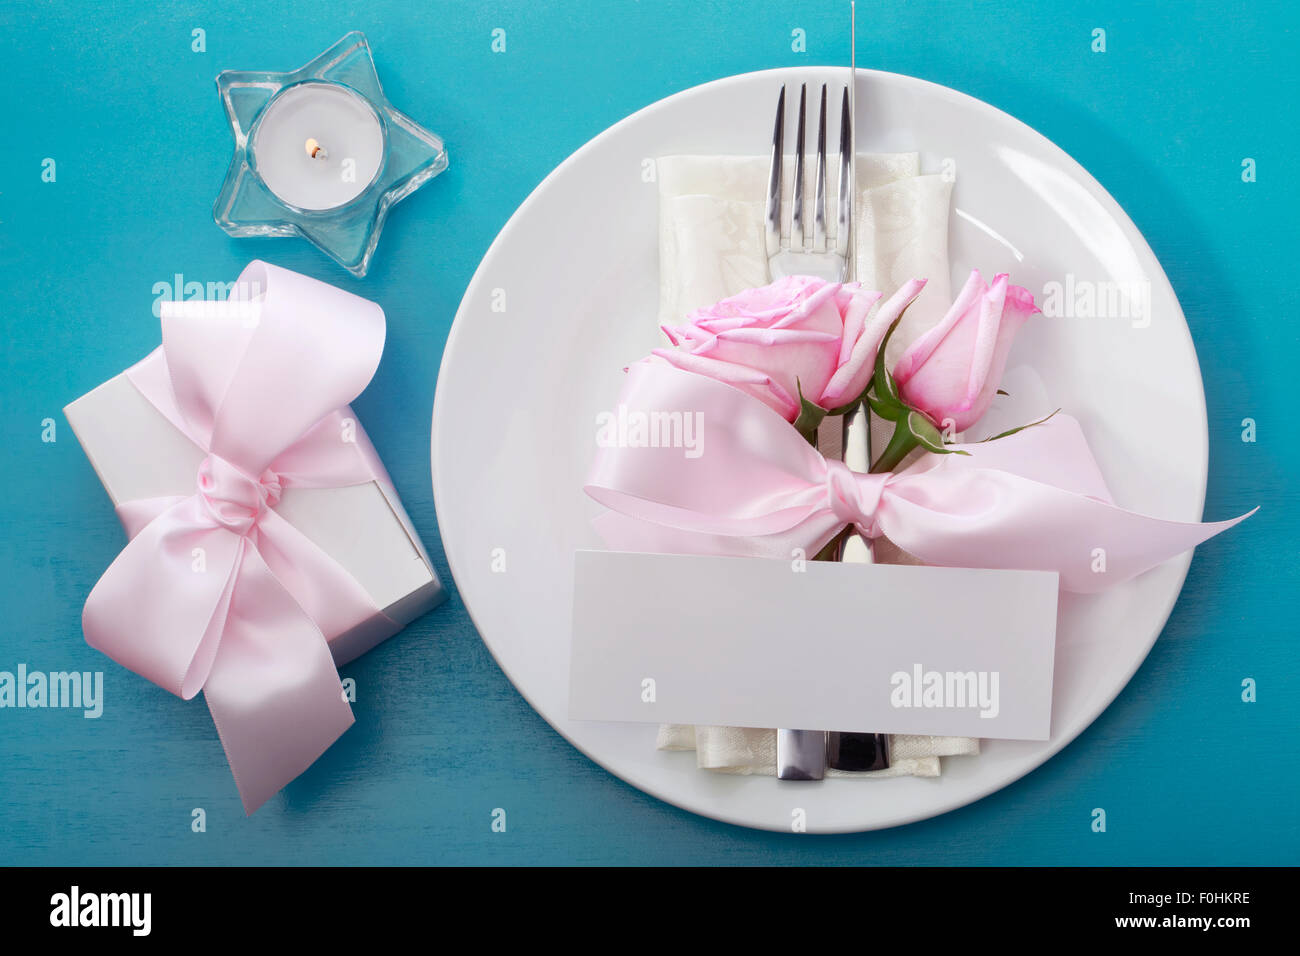 Table setting and gift box with pink roses Stock Photo